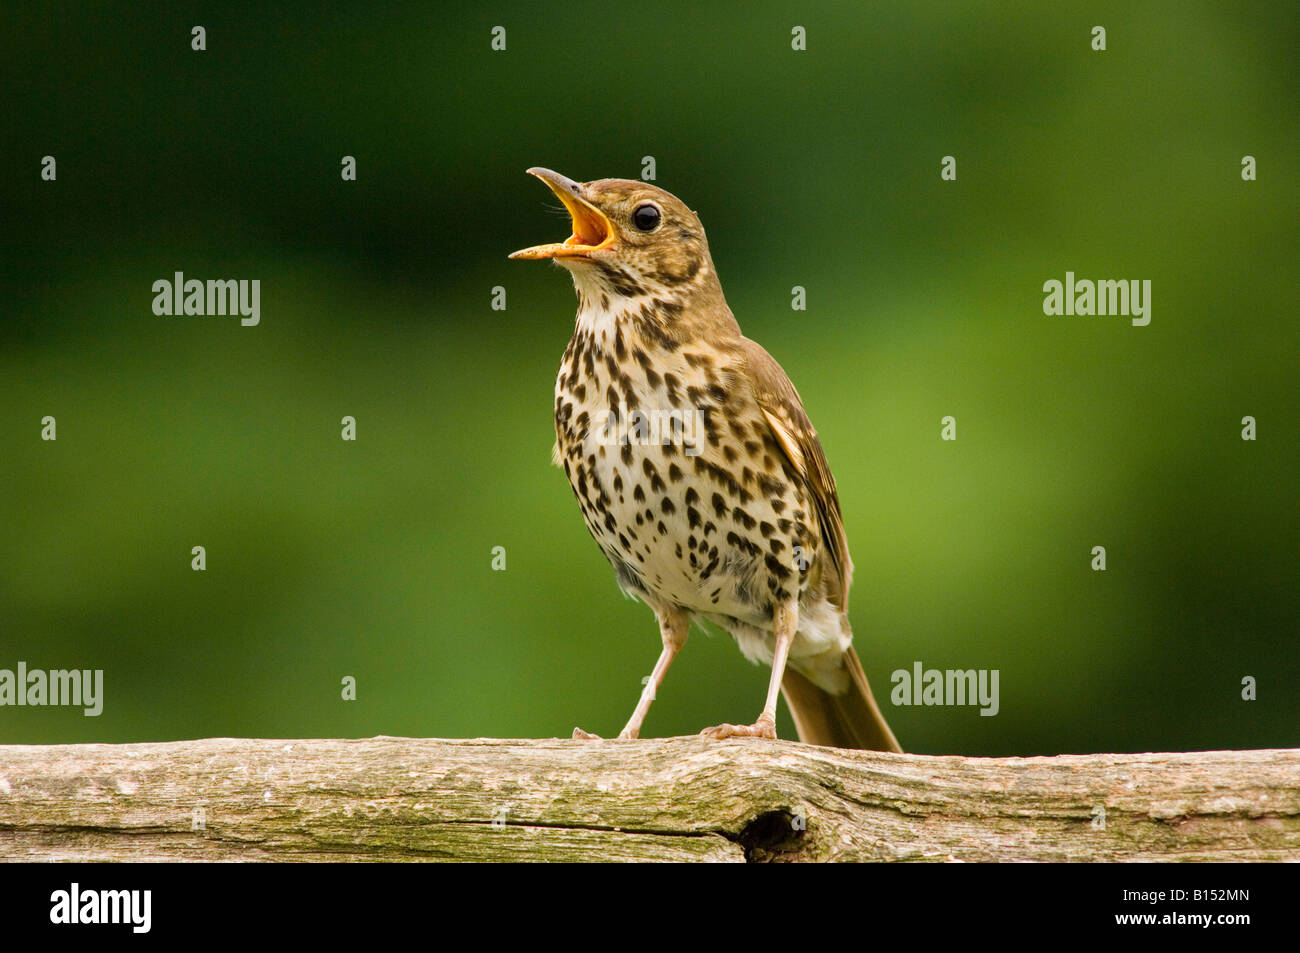 Song Thrush Singing on Perch (Turdus philomelos) in the uk Stock Photo